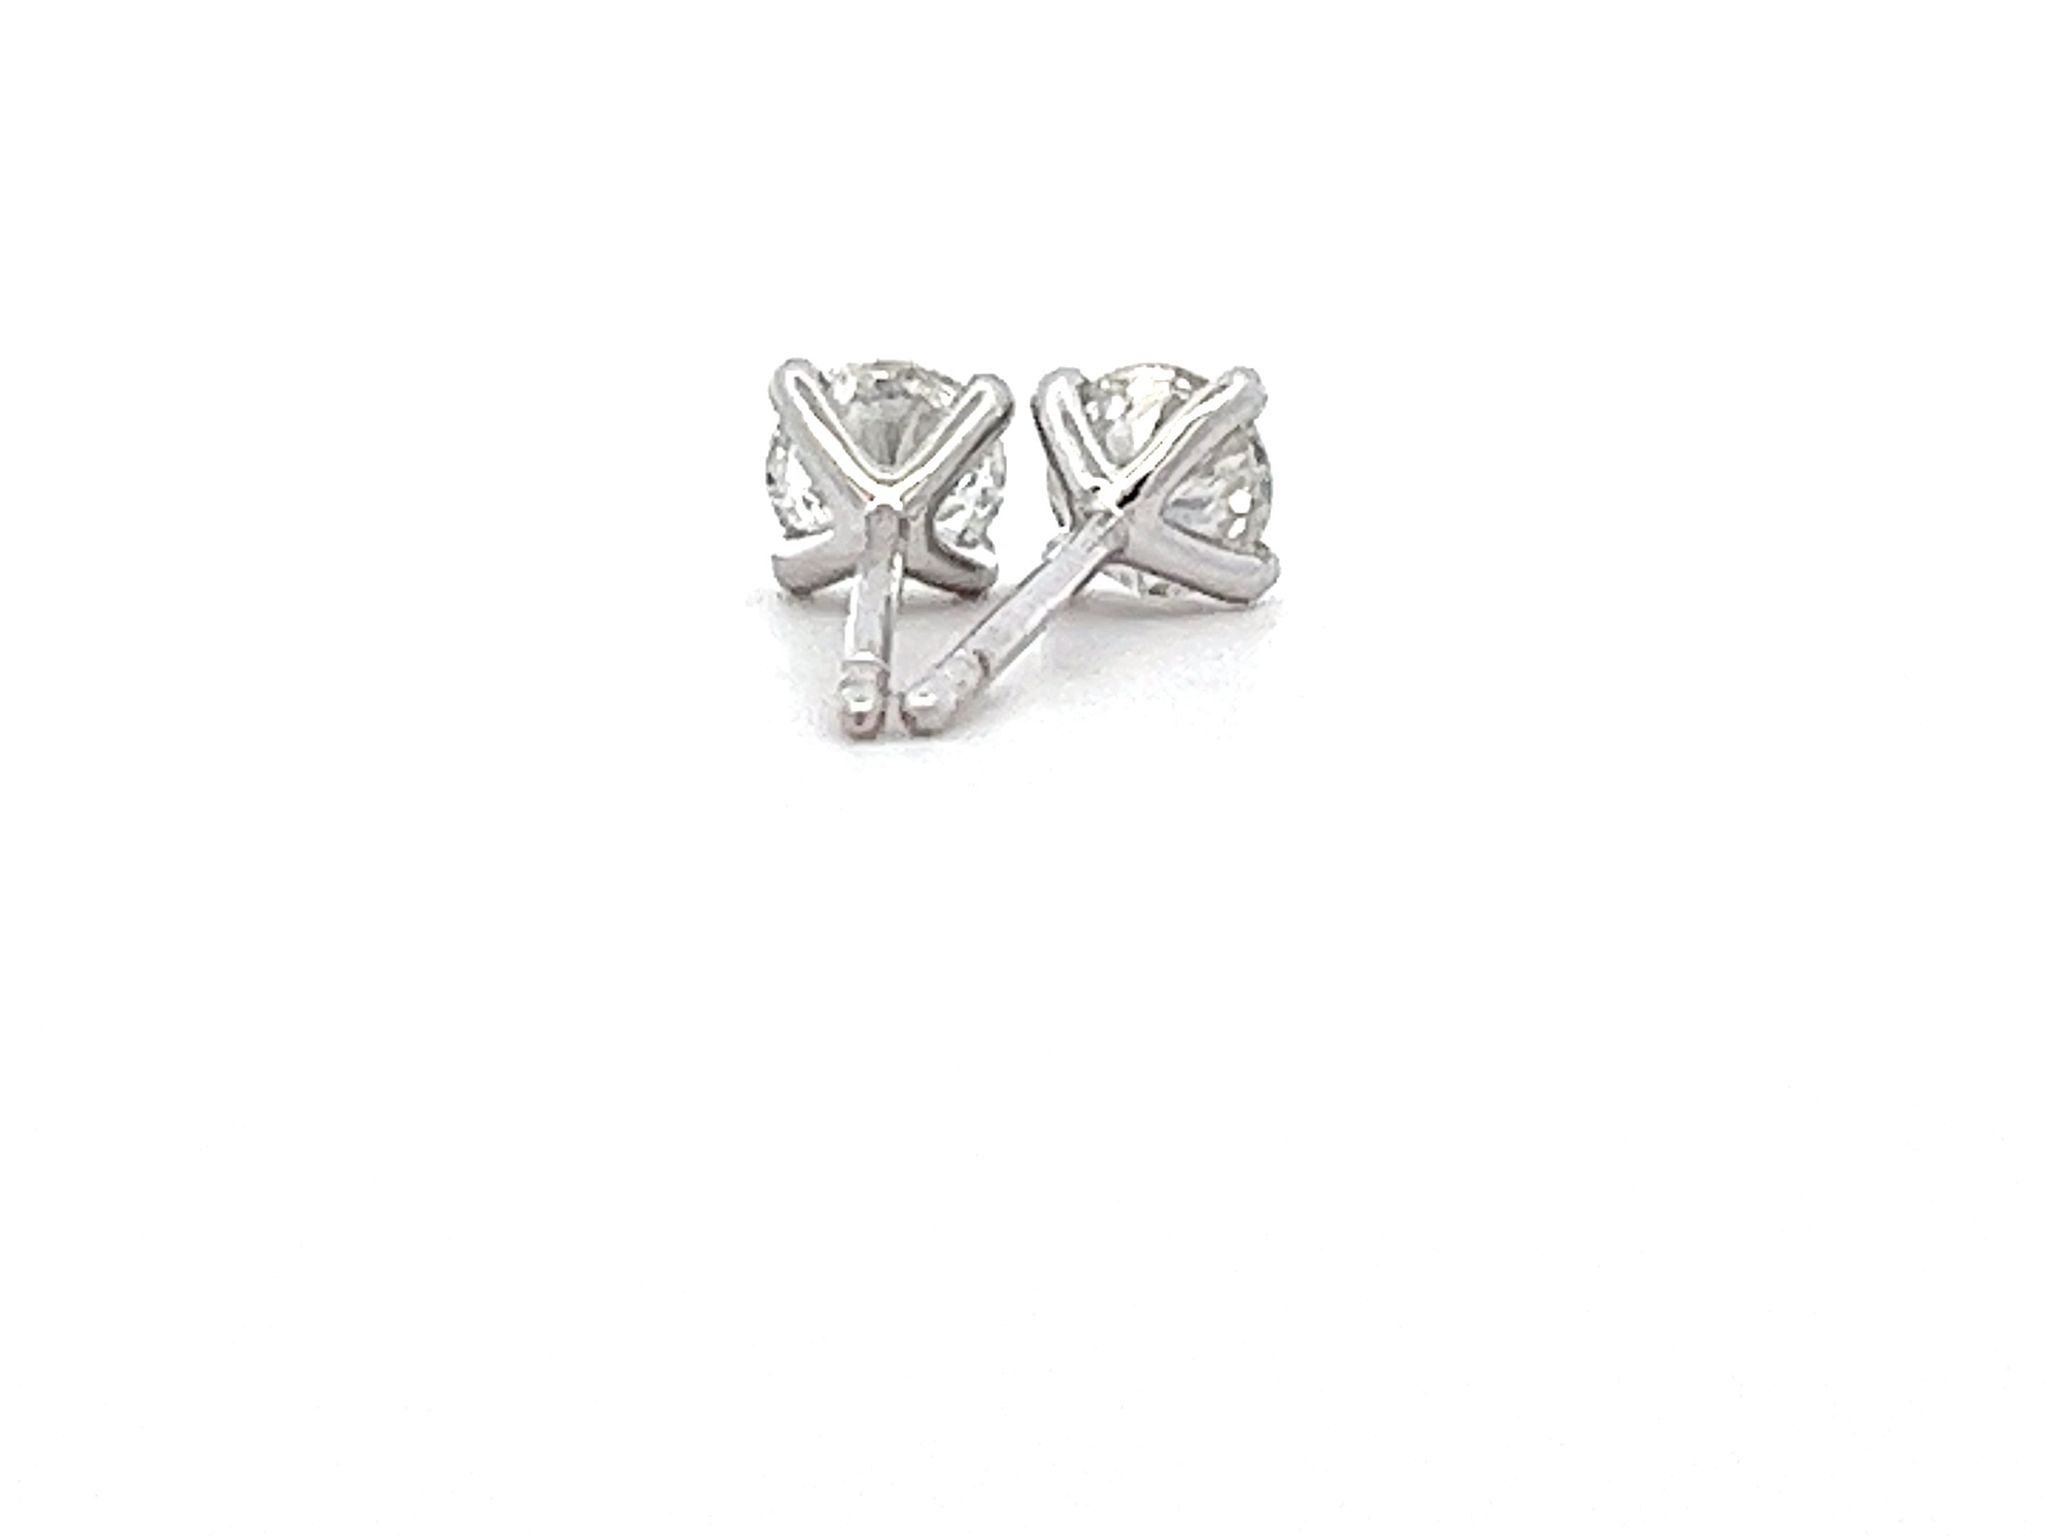 0.60ct Brilliant Cut Diamond Stud Earrings in 18ct White Gold – GIA Certificated